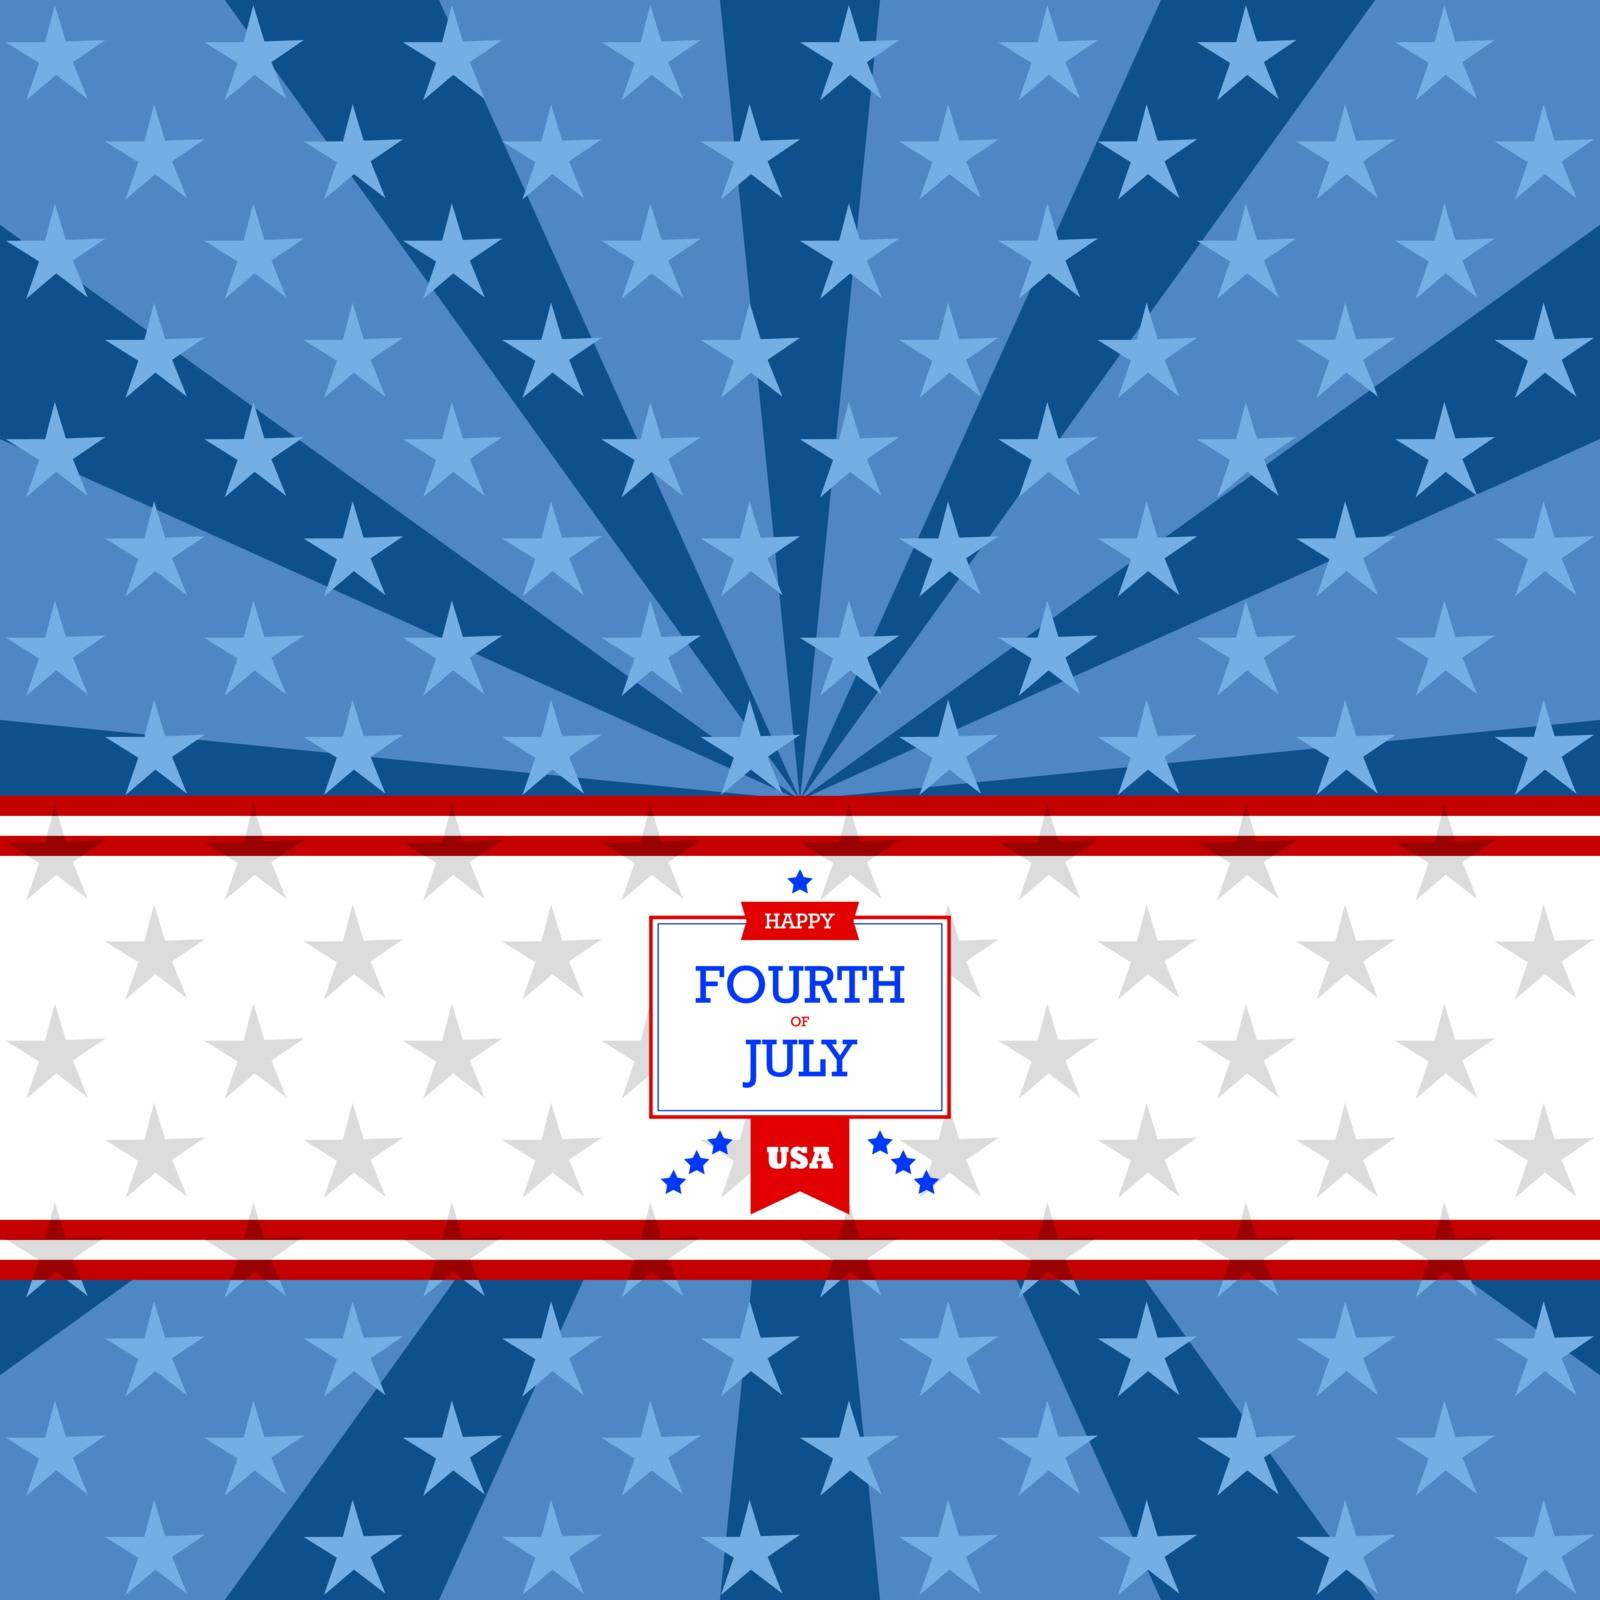 Fourth of July background by bruno1998